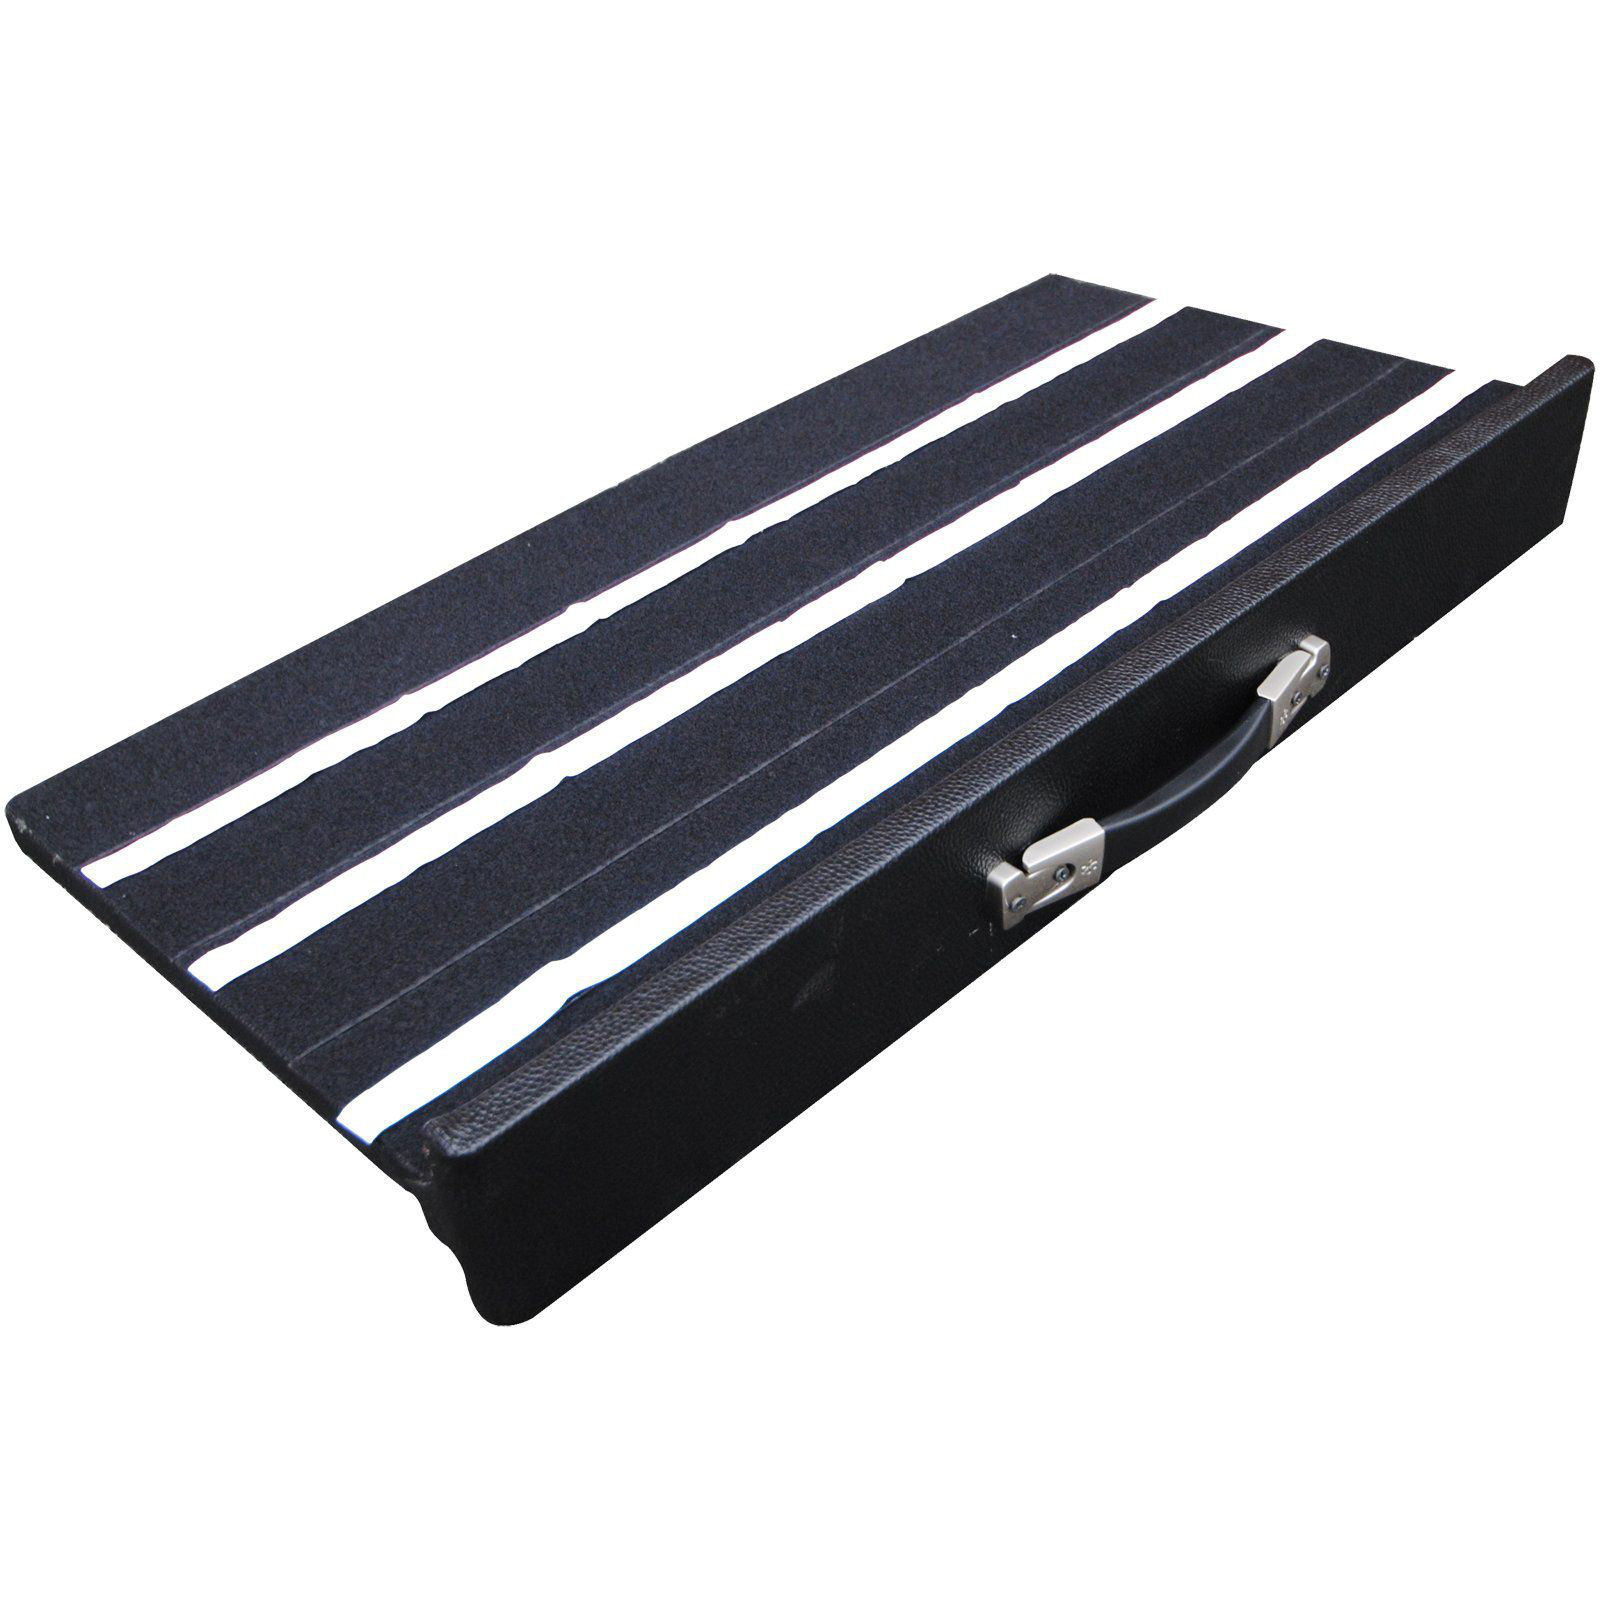 Spider Large Guitar Pedal Board and Case